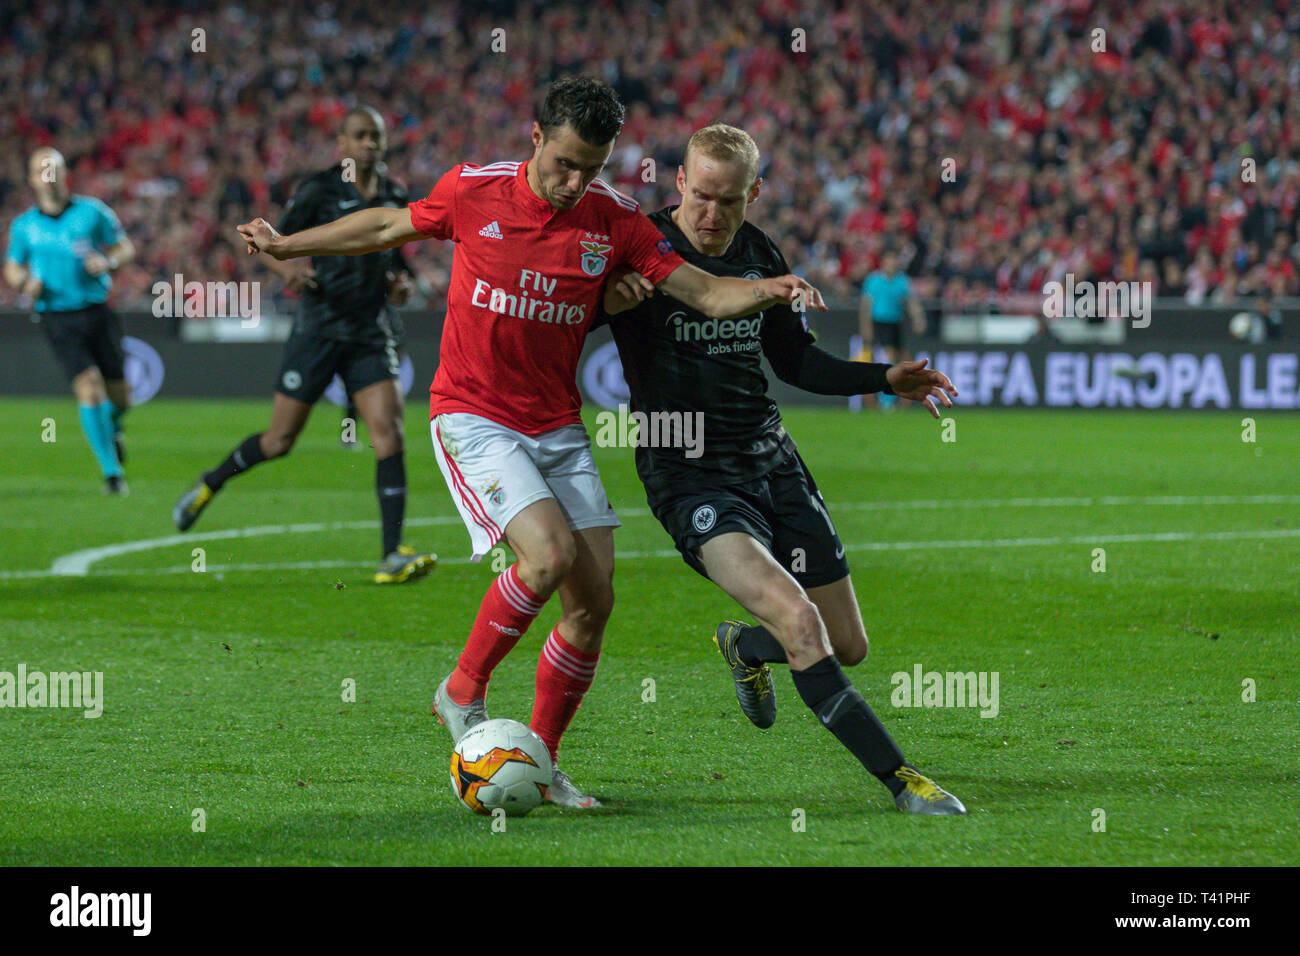 April 11, 2019. Lisbon, Portugal. Benfica's defender from France Sebastien Corchia (7) and Eintracht Frankfurt's midfielder from Germany Sebastian Rode (17) in action during the game of the UEFA Europa League, Quarter Finals, SL Benfica vs Eintracht Frankfurt © Alexandre de Sousa/Alamy Live News Stock Photo